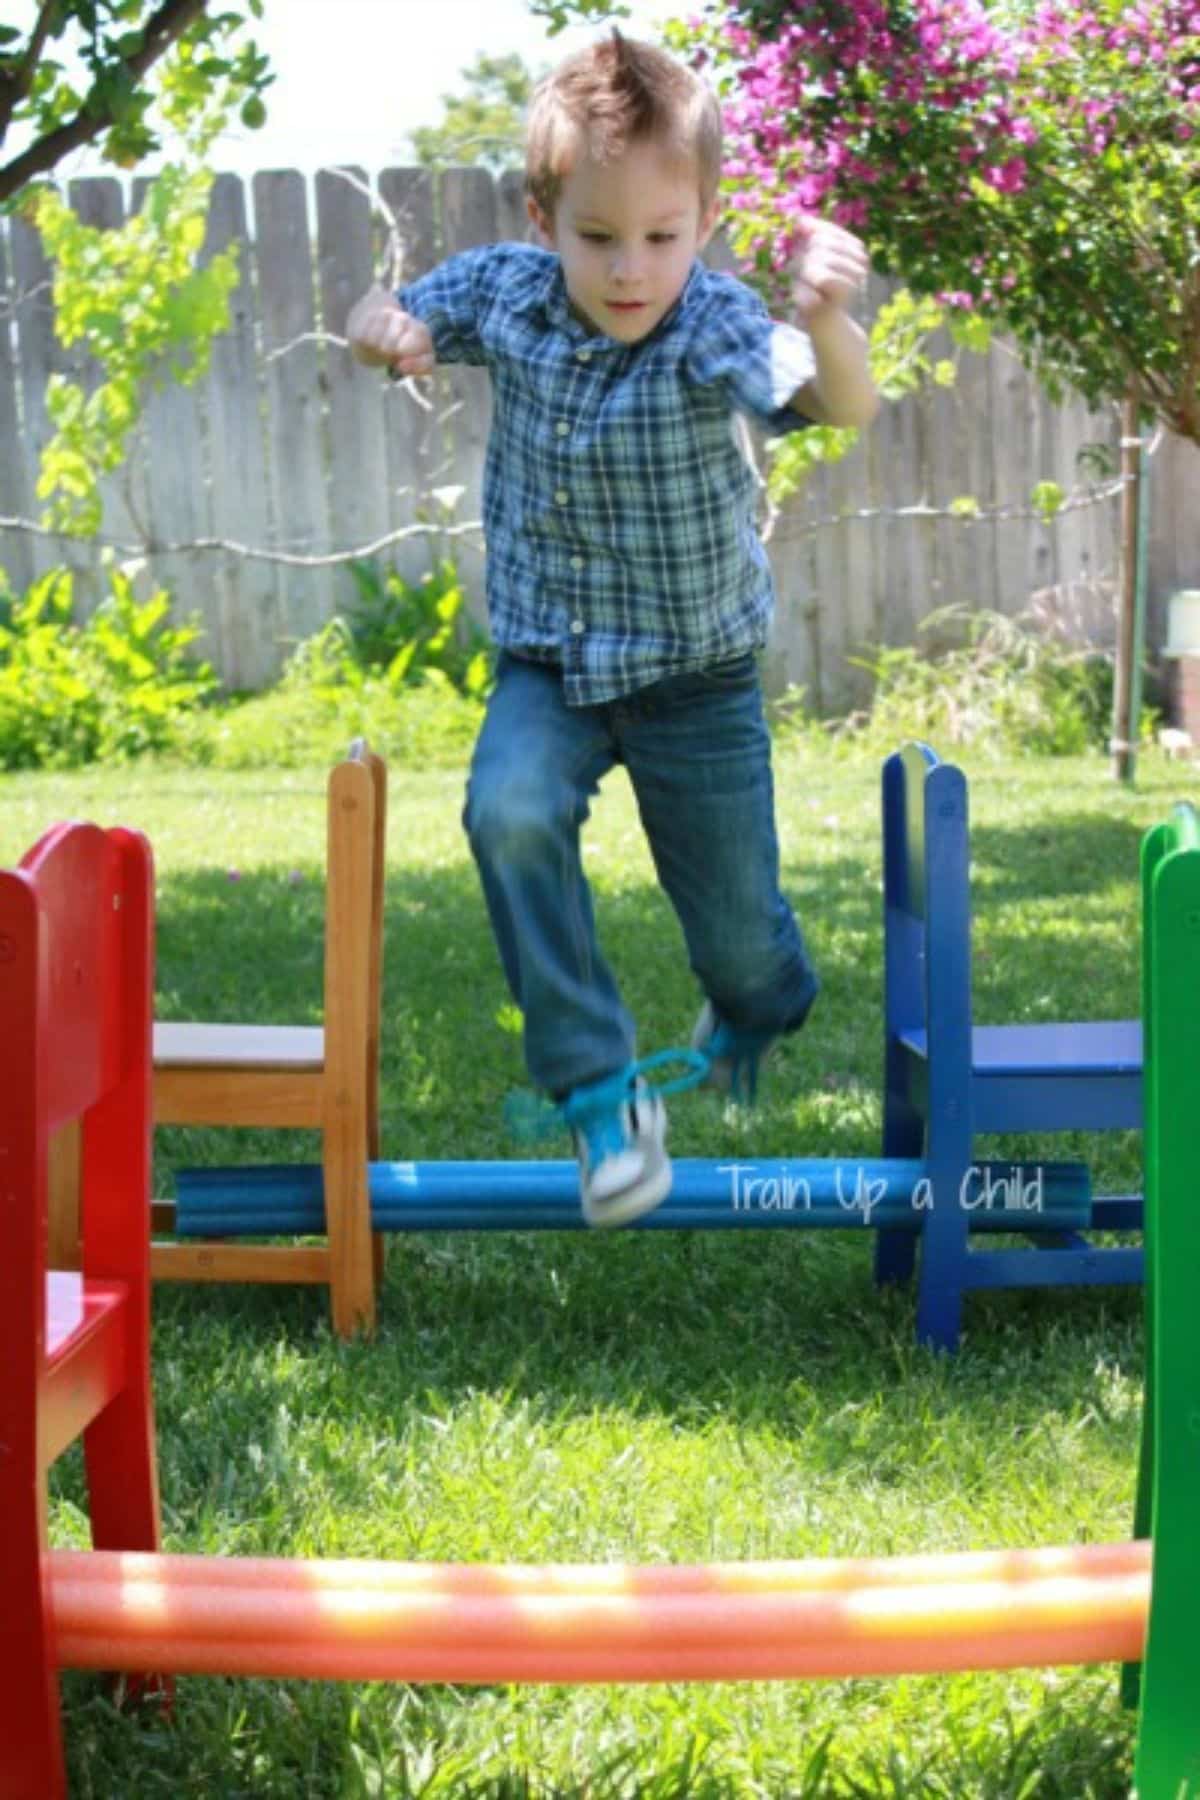 Young boy jumping over obstacles outdoor.